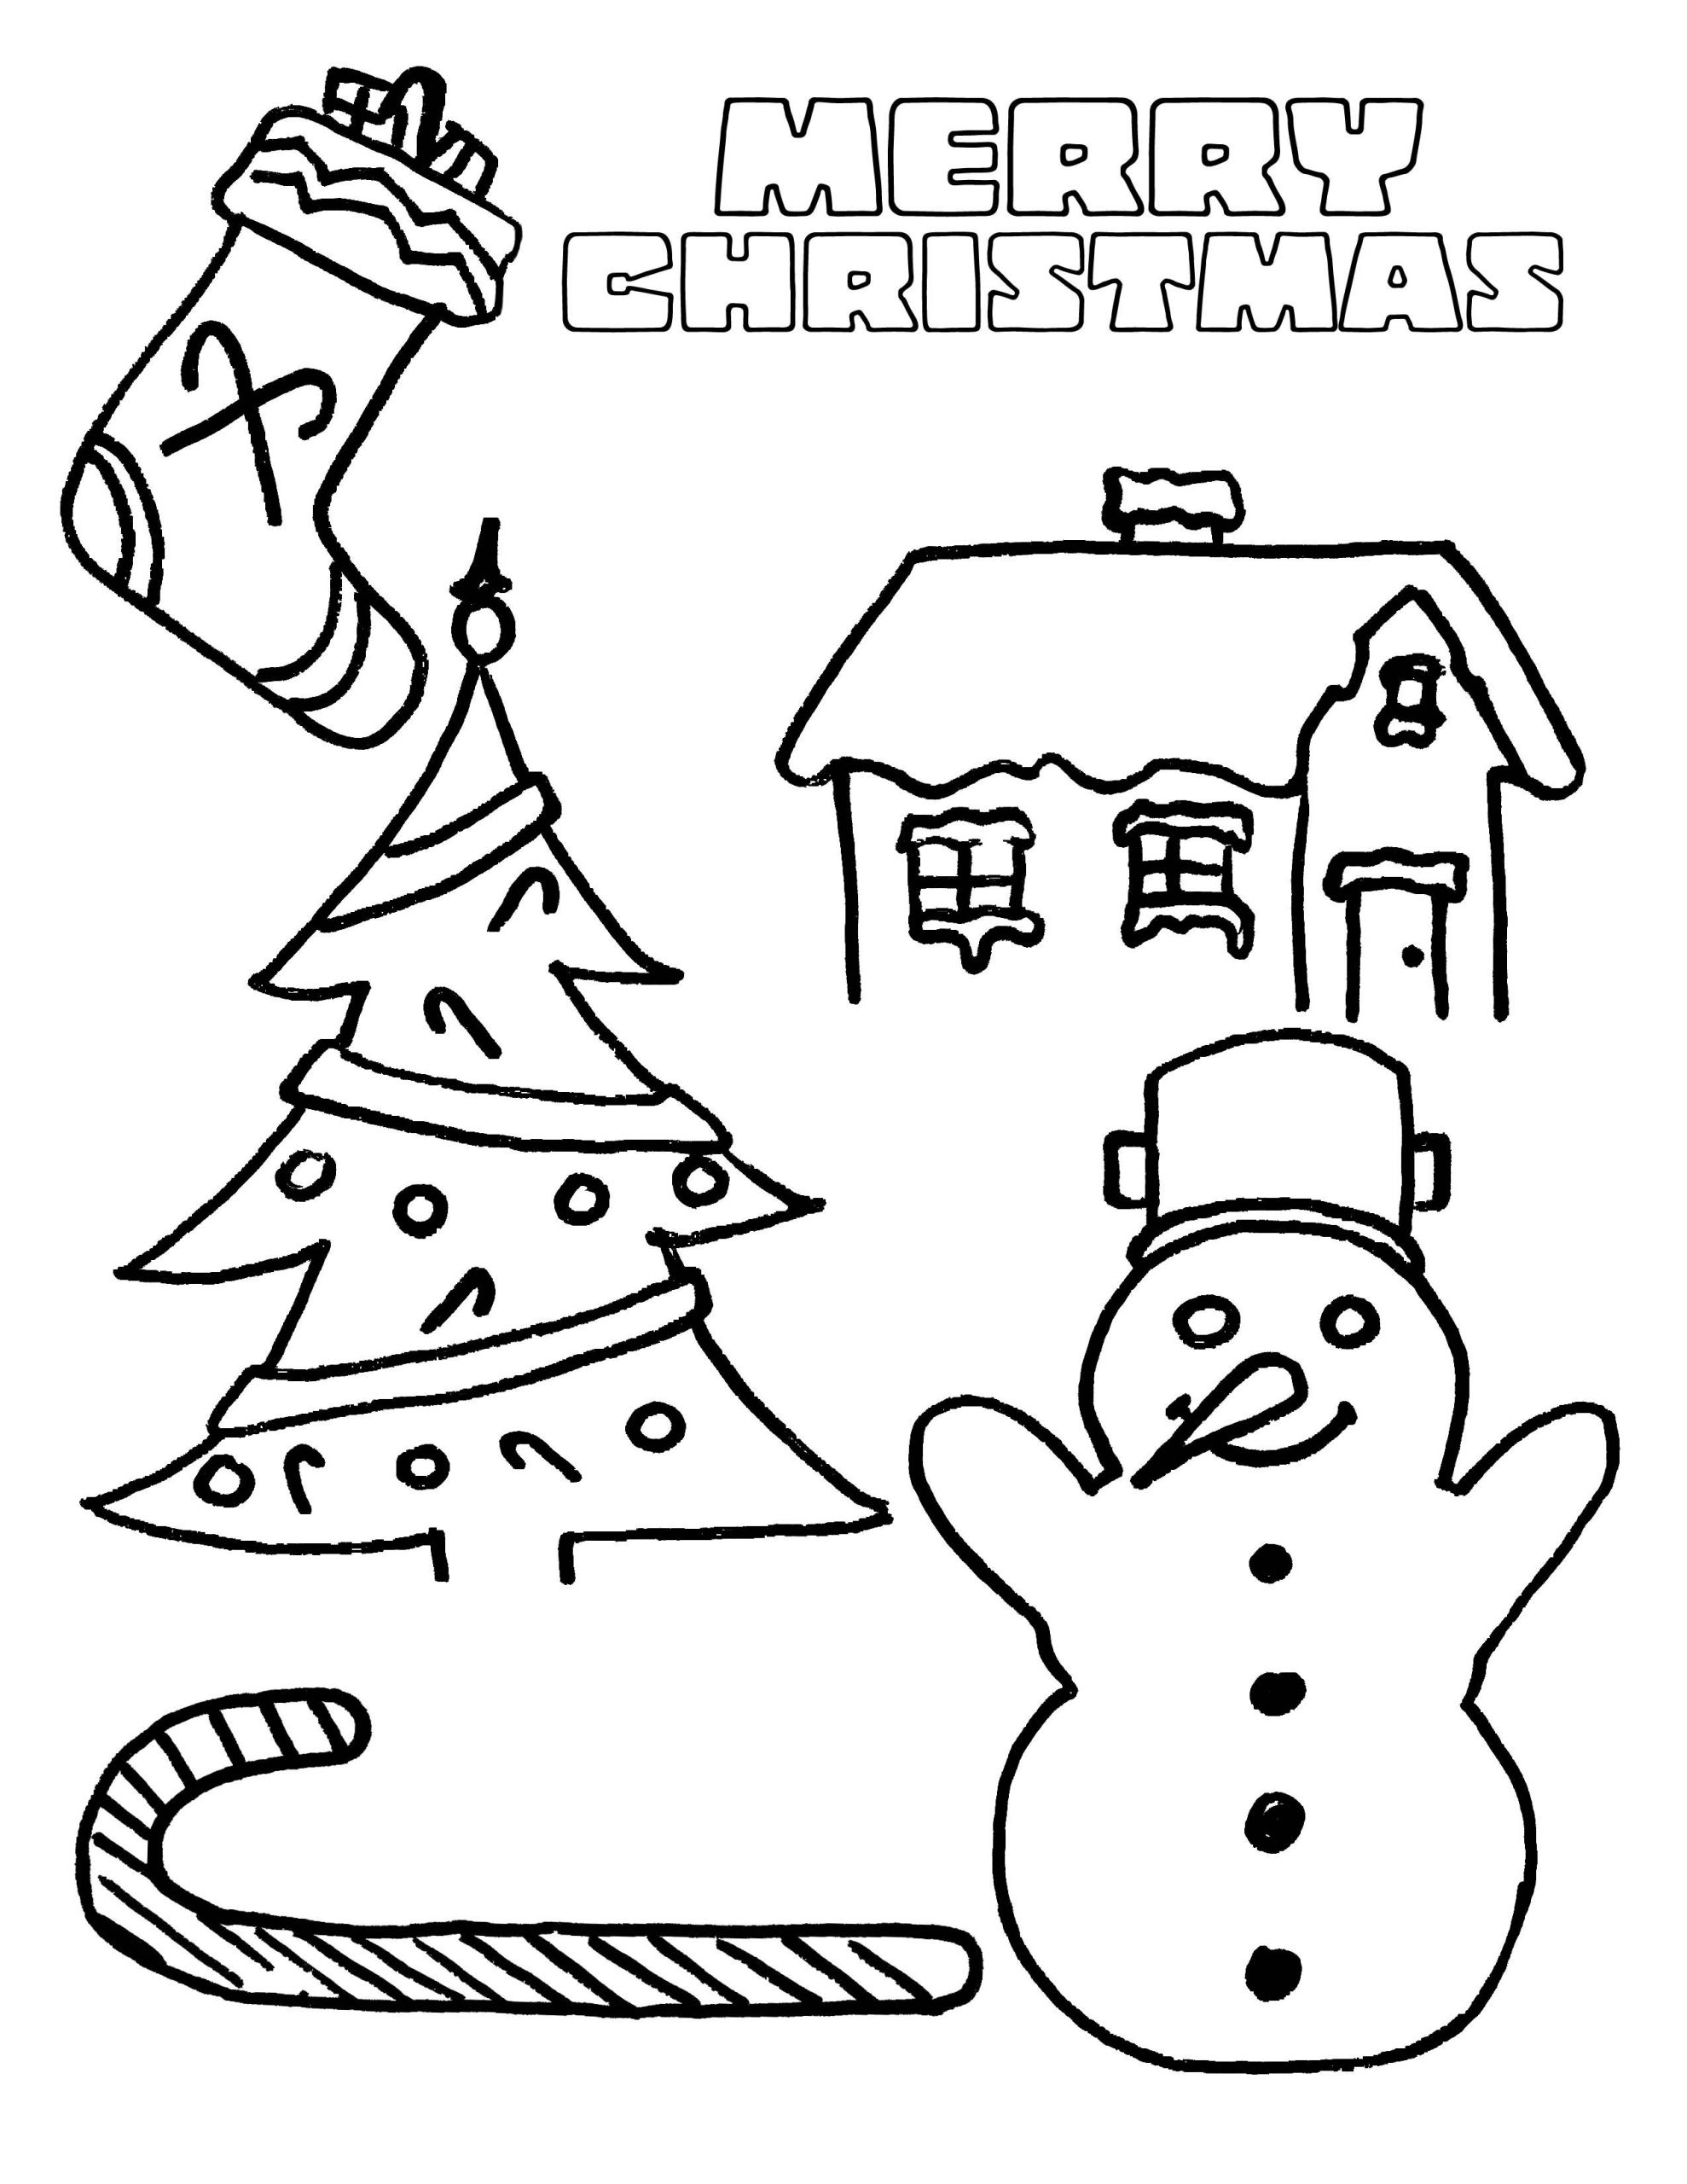 Coloring Pages For Kids Christmas
 Party Simplicity free Christmas coloring page for kids